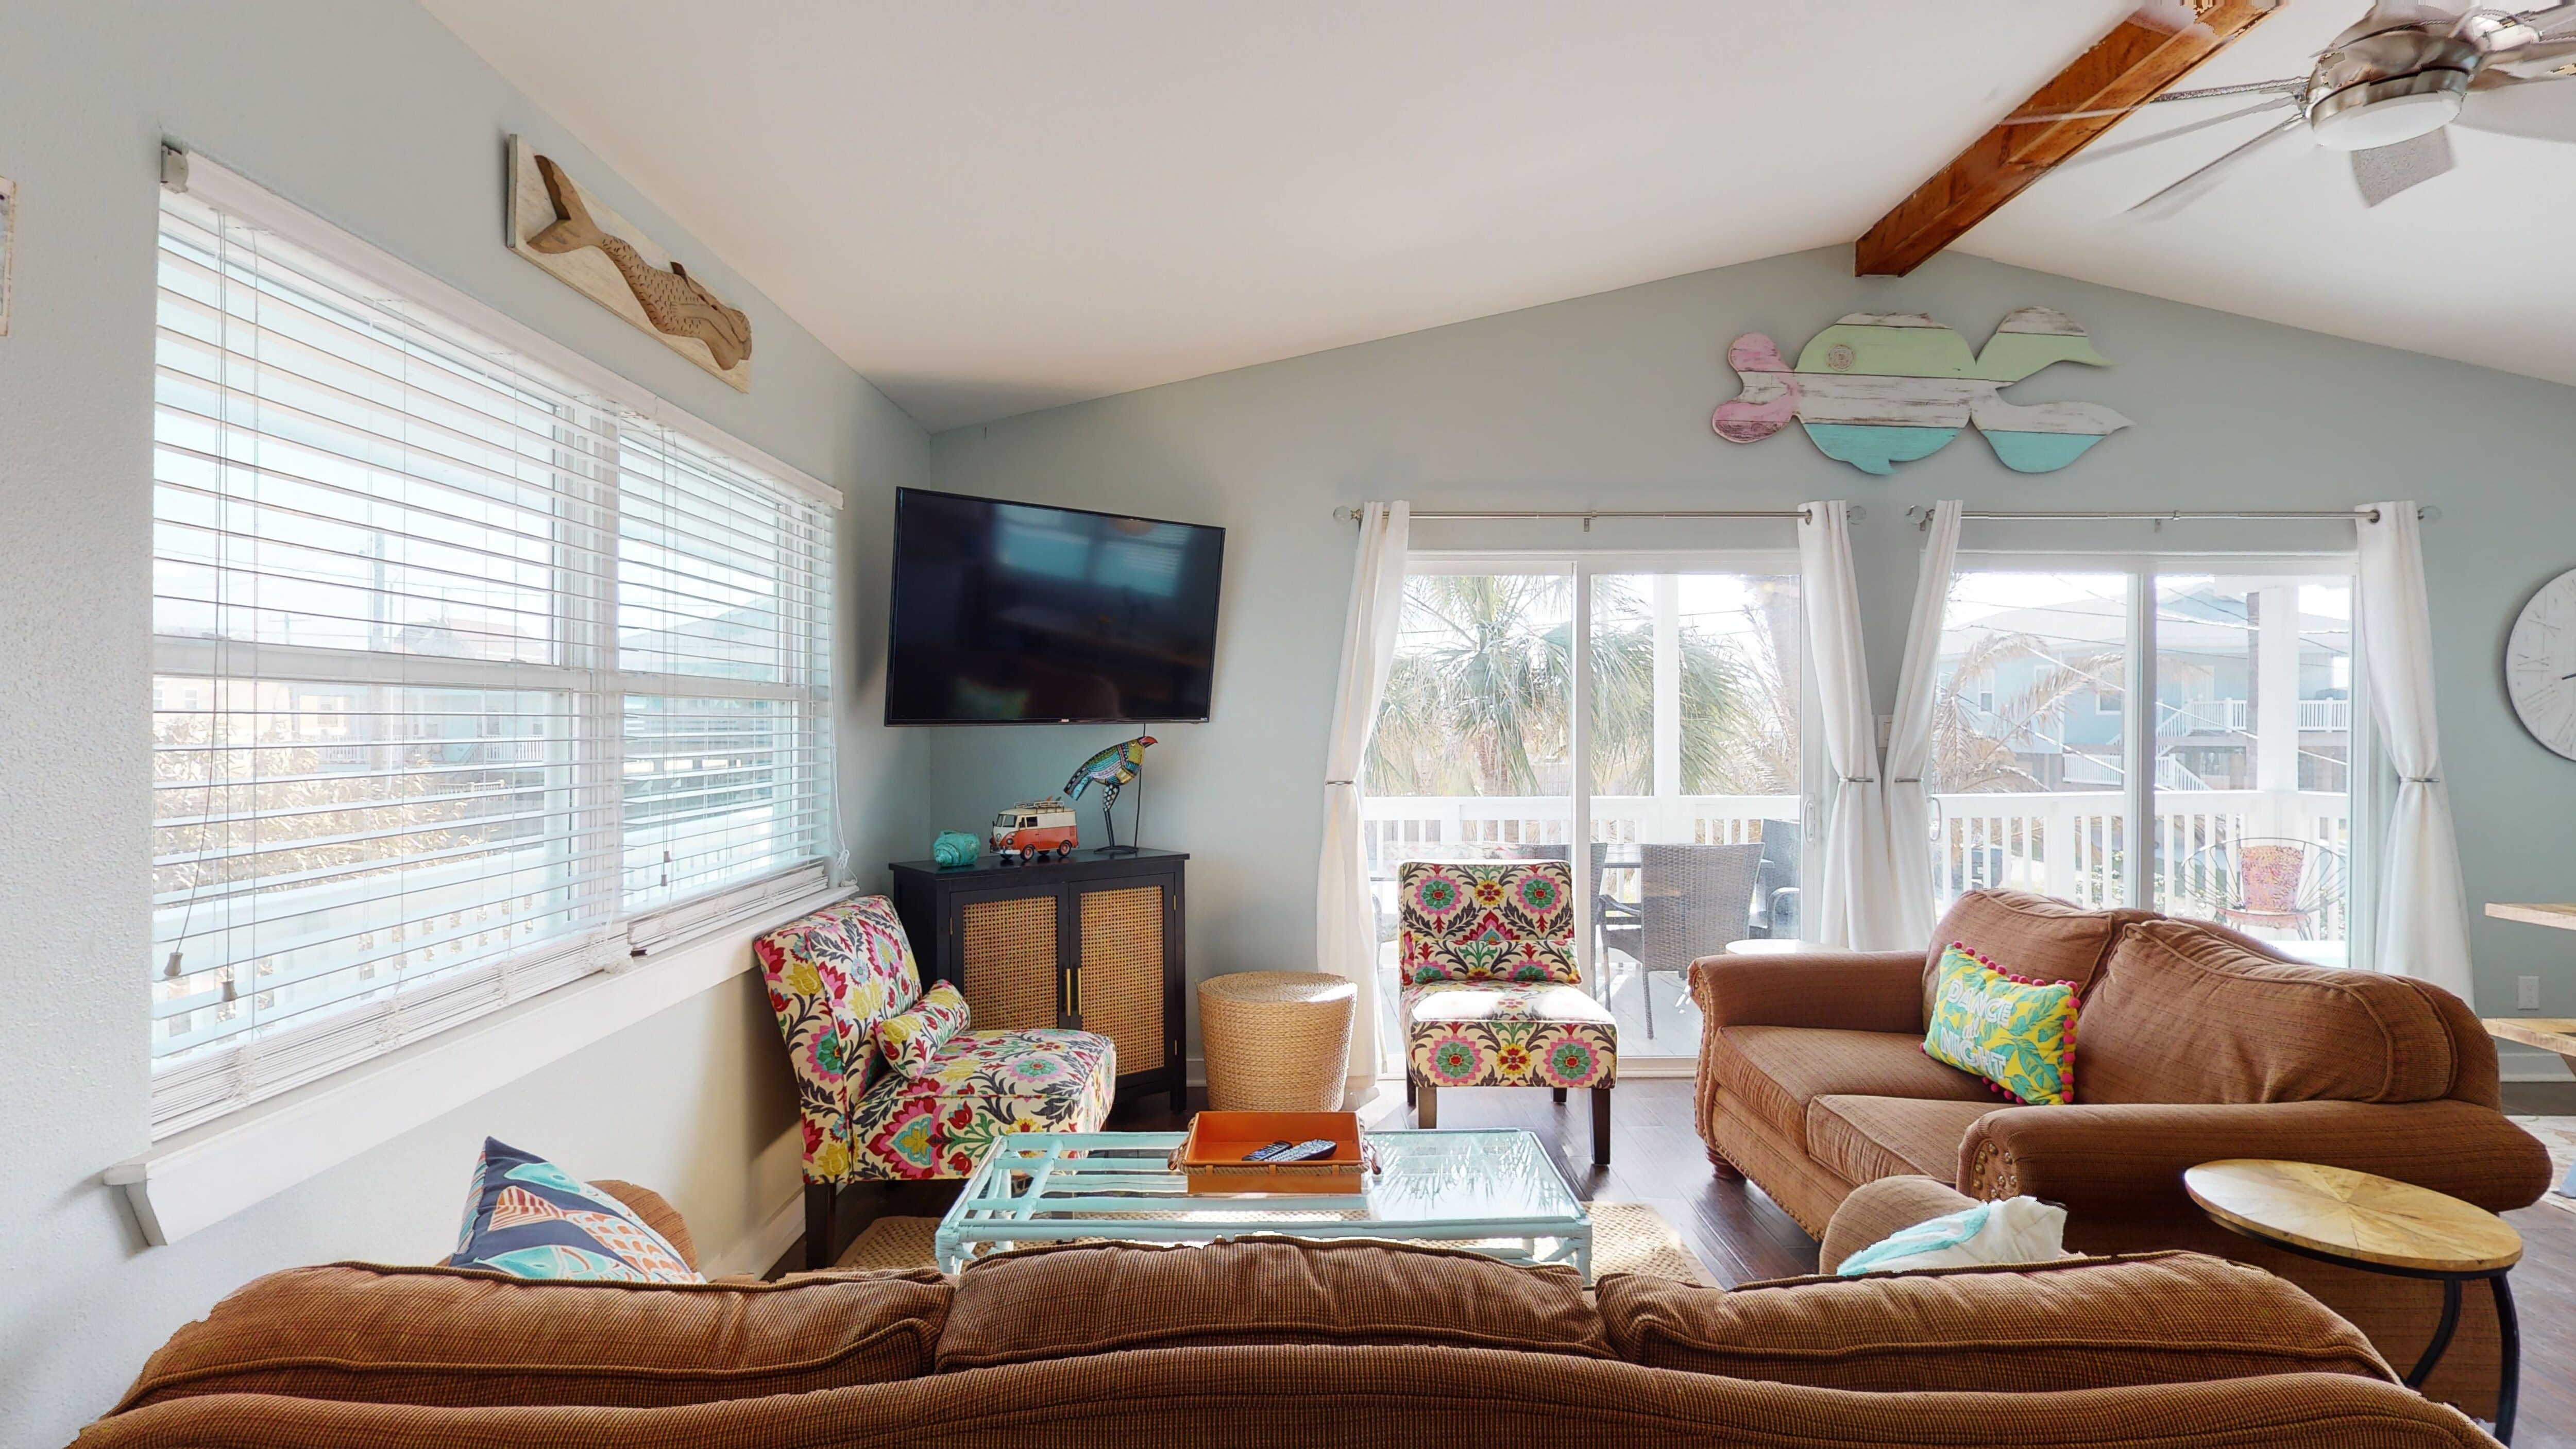 Property Image 2 - SB519: A Big Nauti is a 1 story stilt beach house located in town